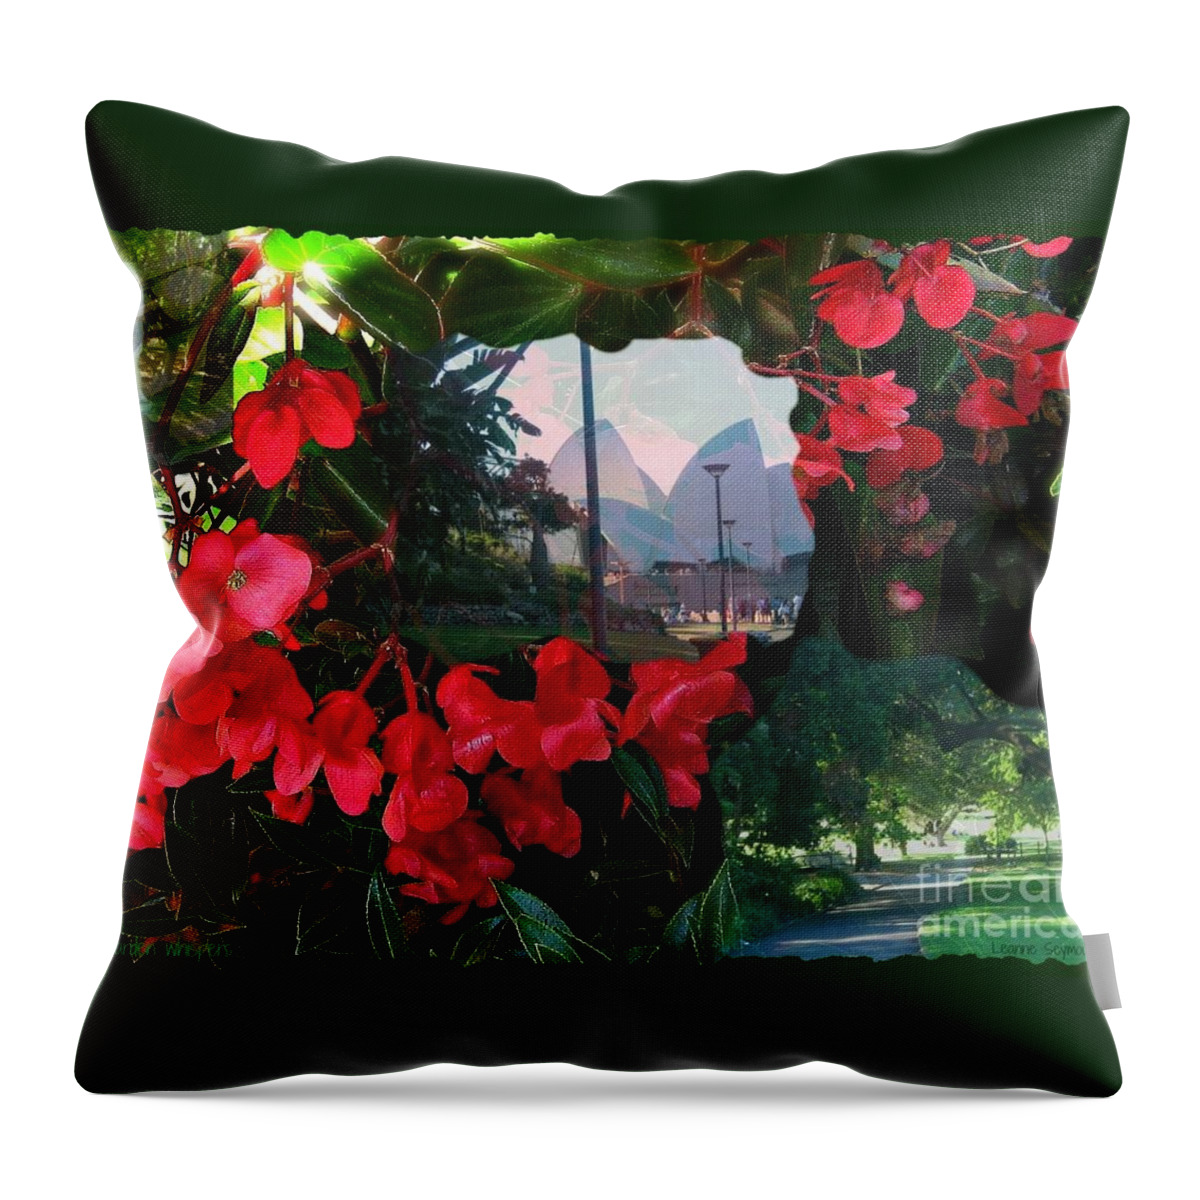 Garden Throw Pillow featuring the mixed media Garden Whispers by Leanne Seymour